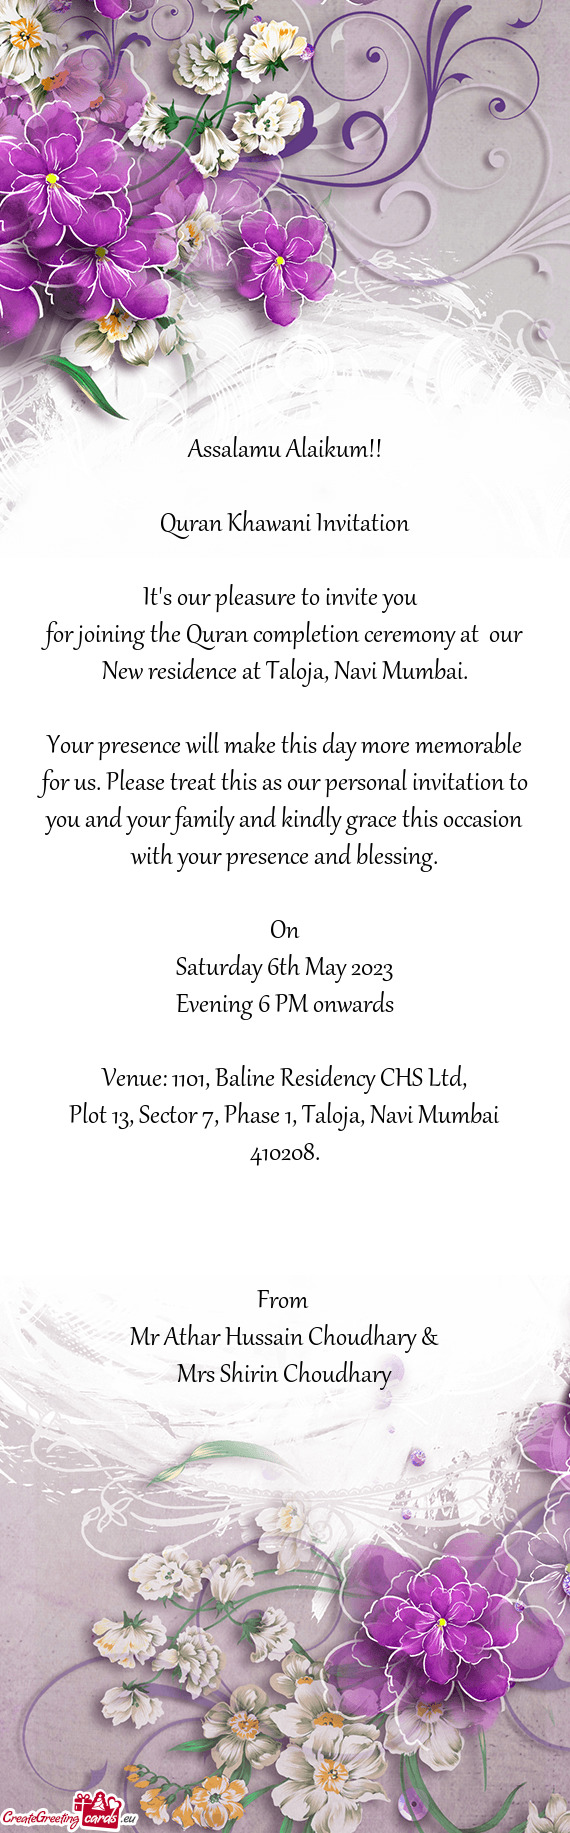 For joining the Quran completion ceremony at our New residence at Taloja, Navi Mumbai